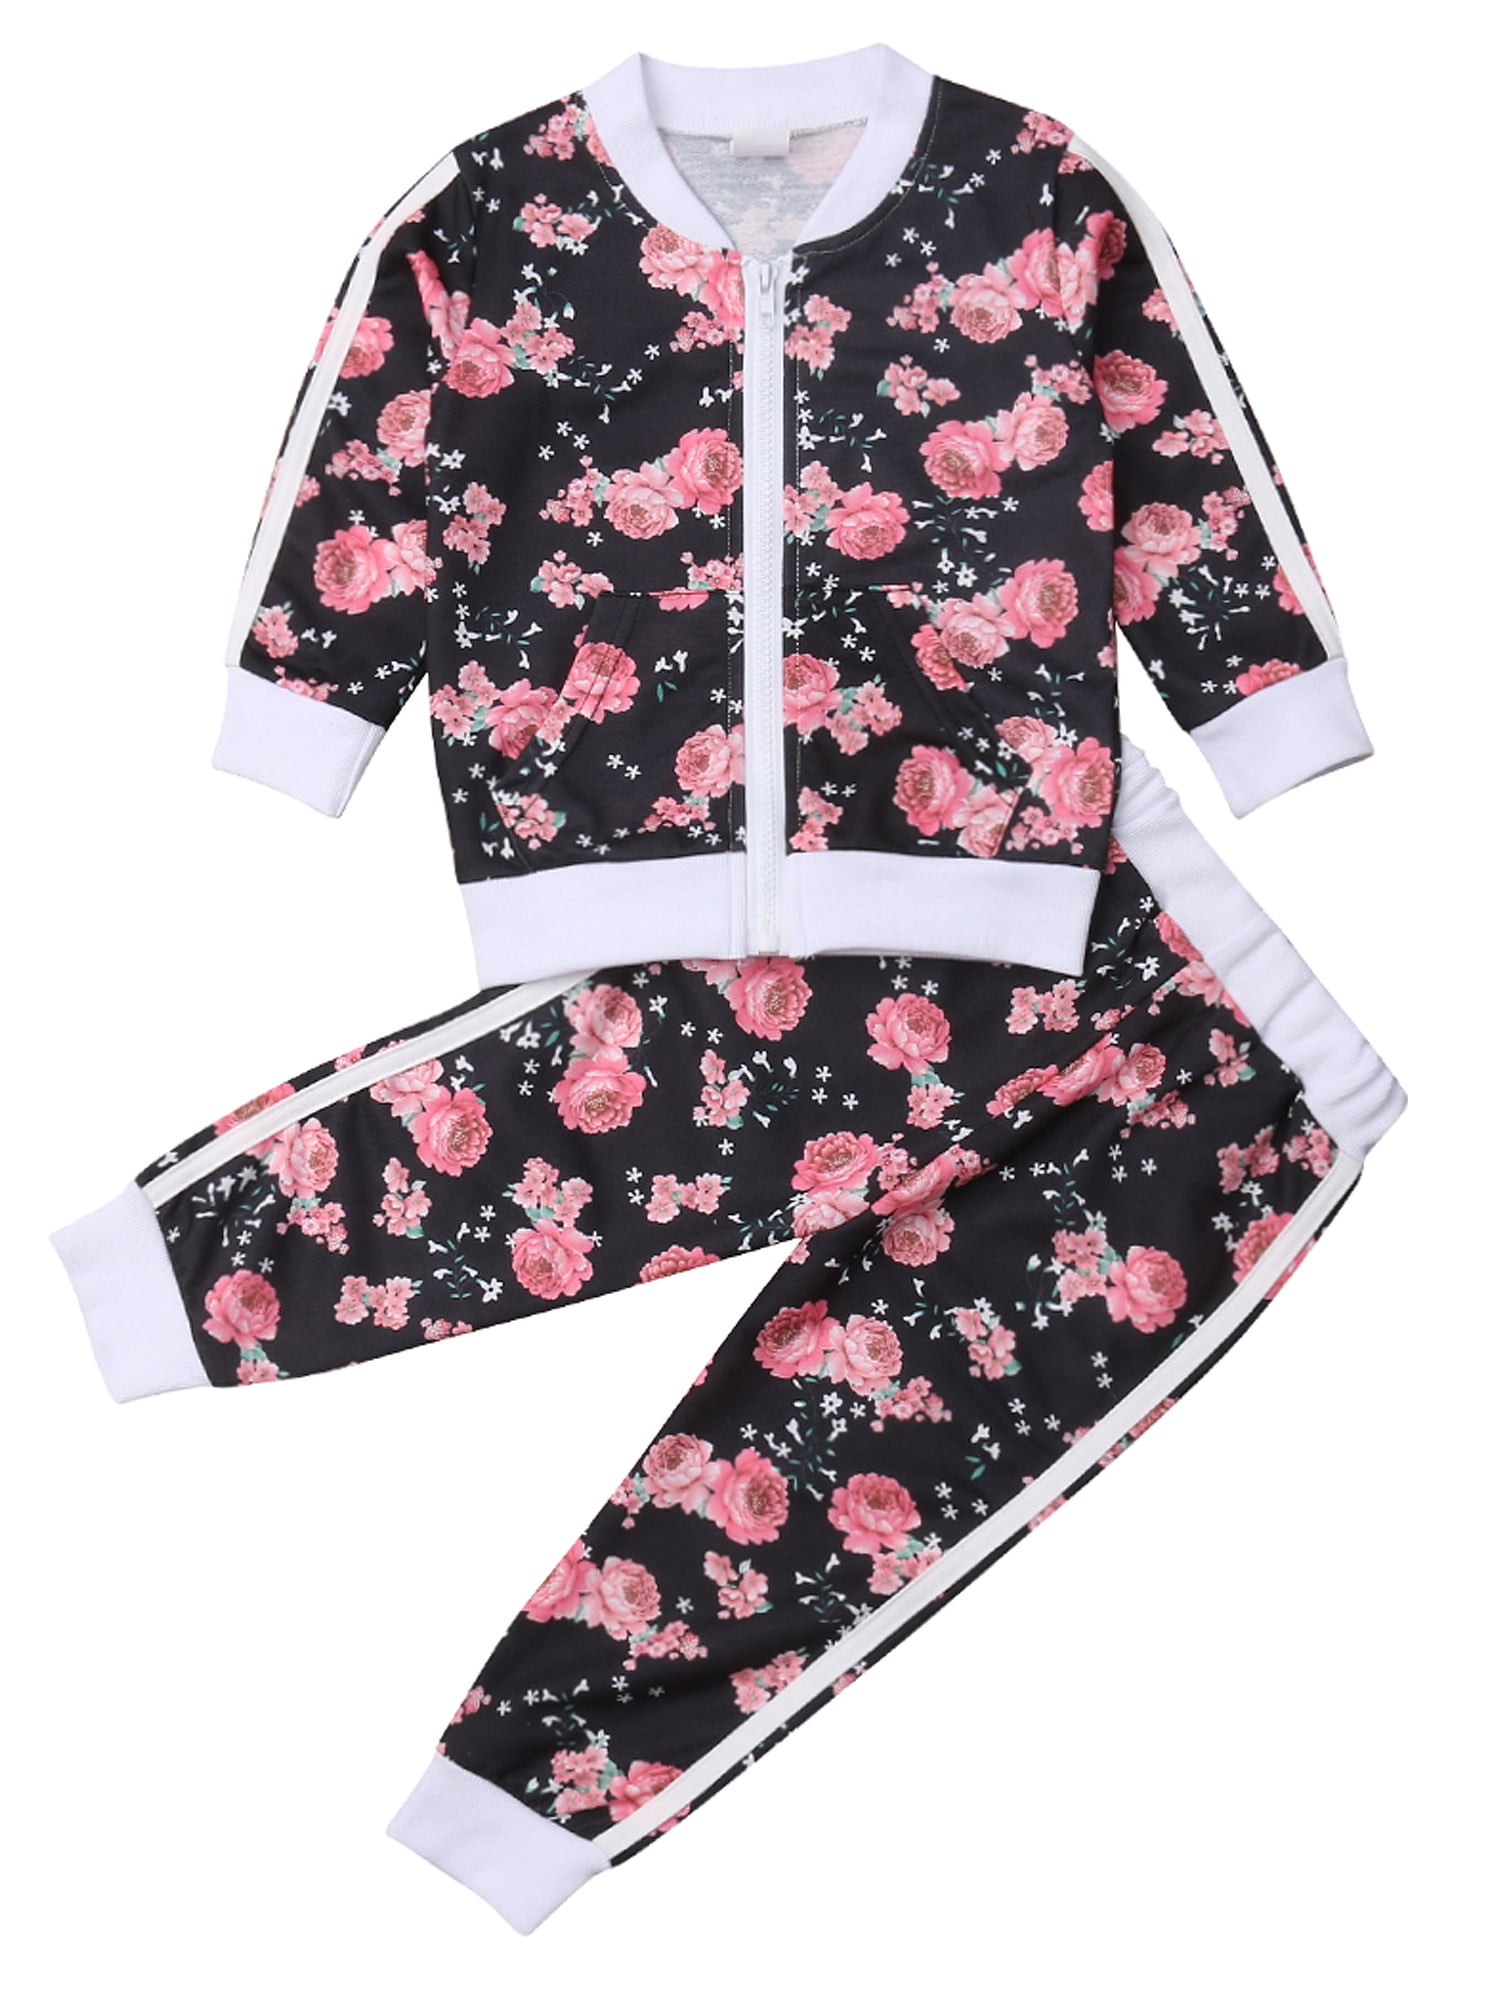 Toddler Baby Girls Floral Clothes Long Sleeve Hello Hoodie Sweatshirt Tops Leopard Pants Set Fall Winter Outfit